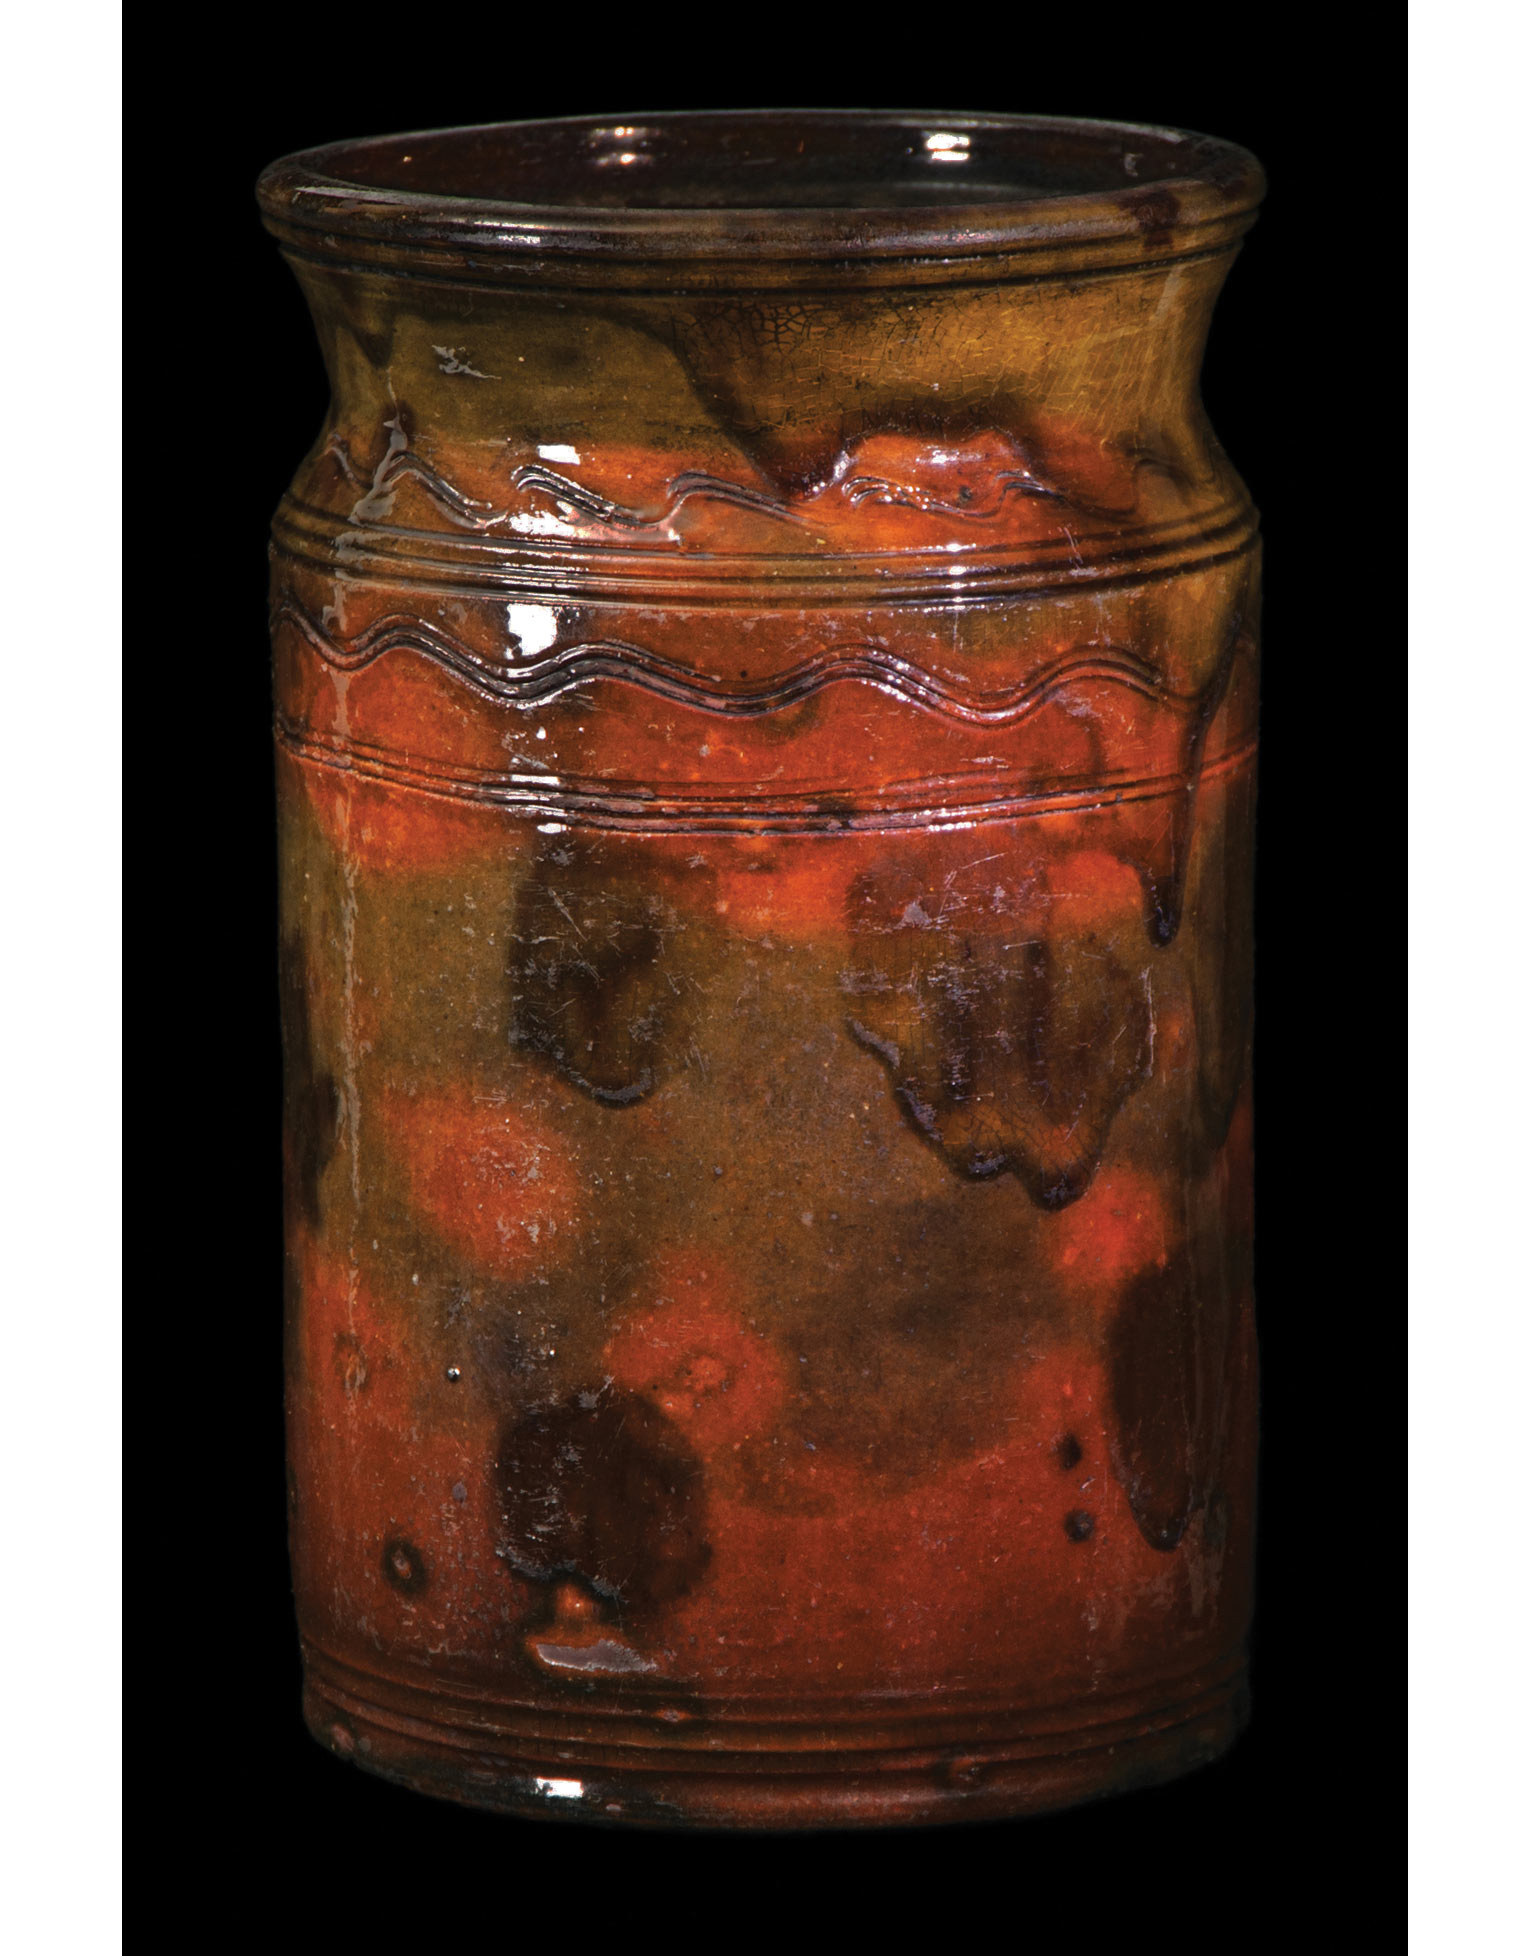 Lot 23C: Tall Cylindrical New England Redware Pot